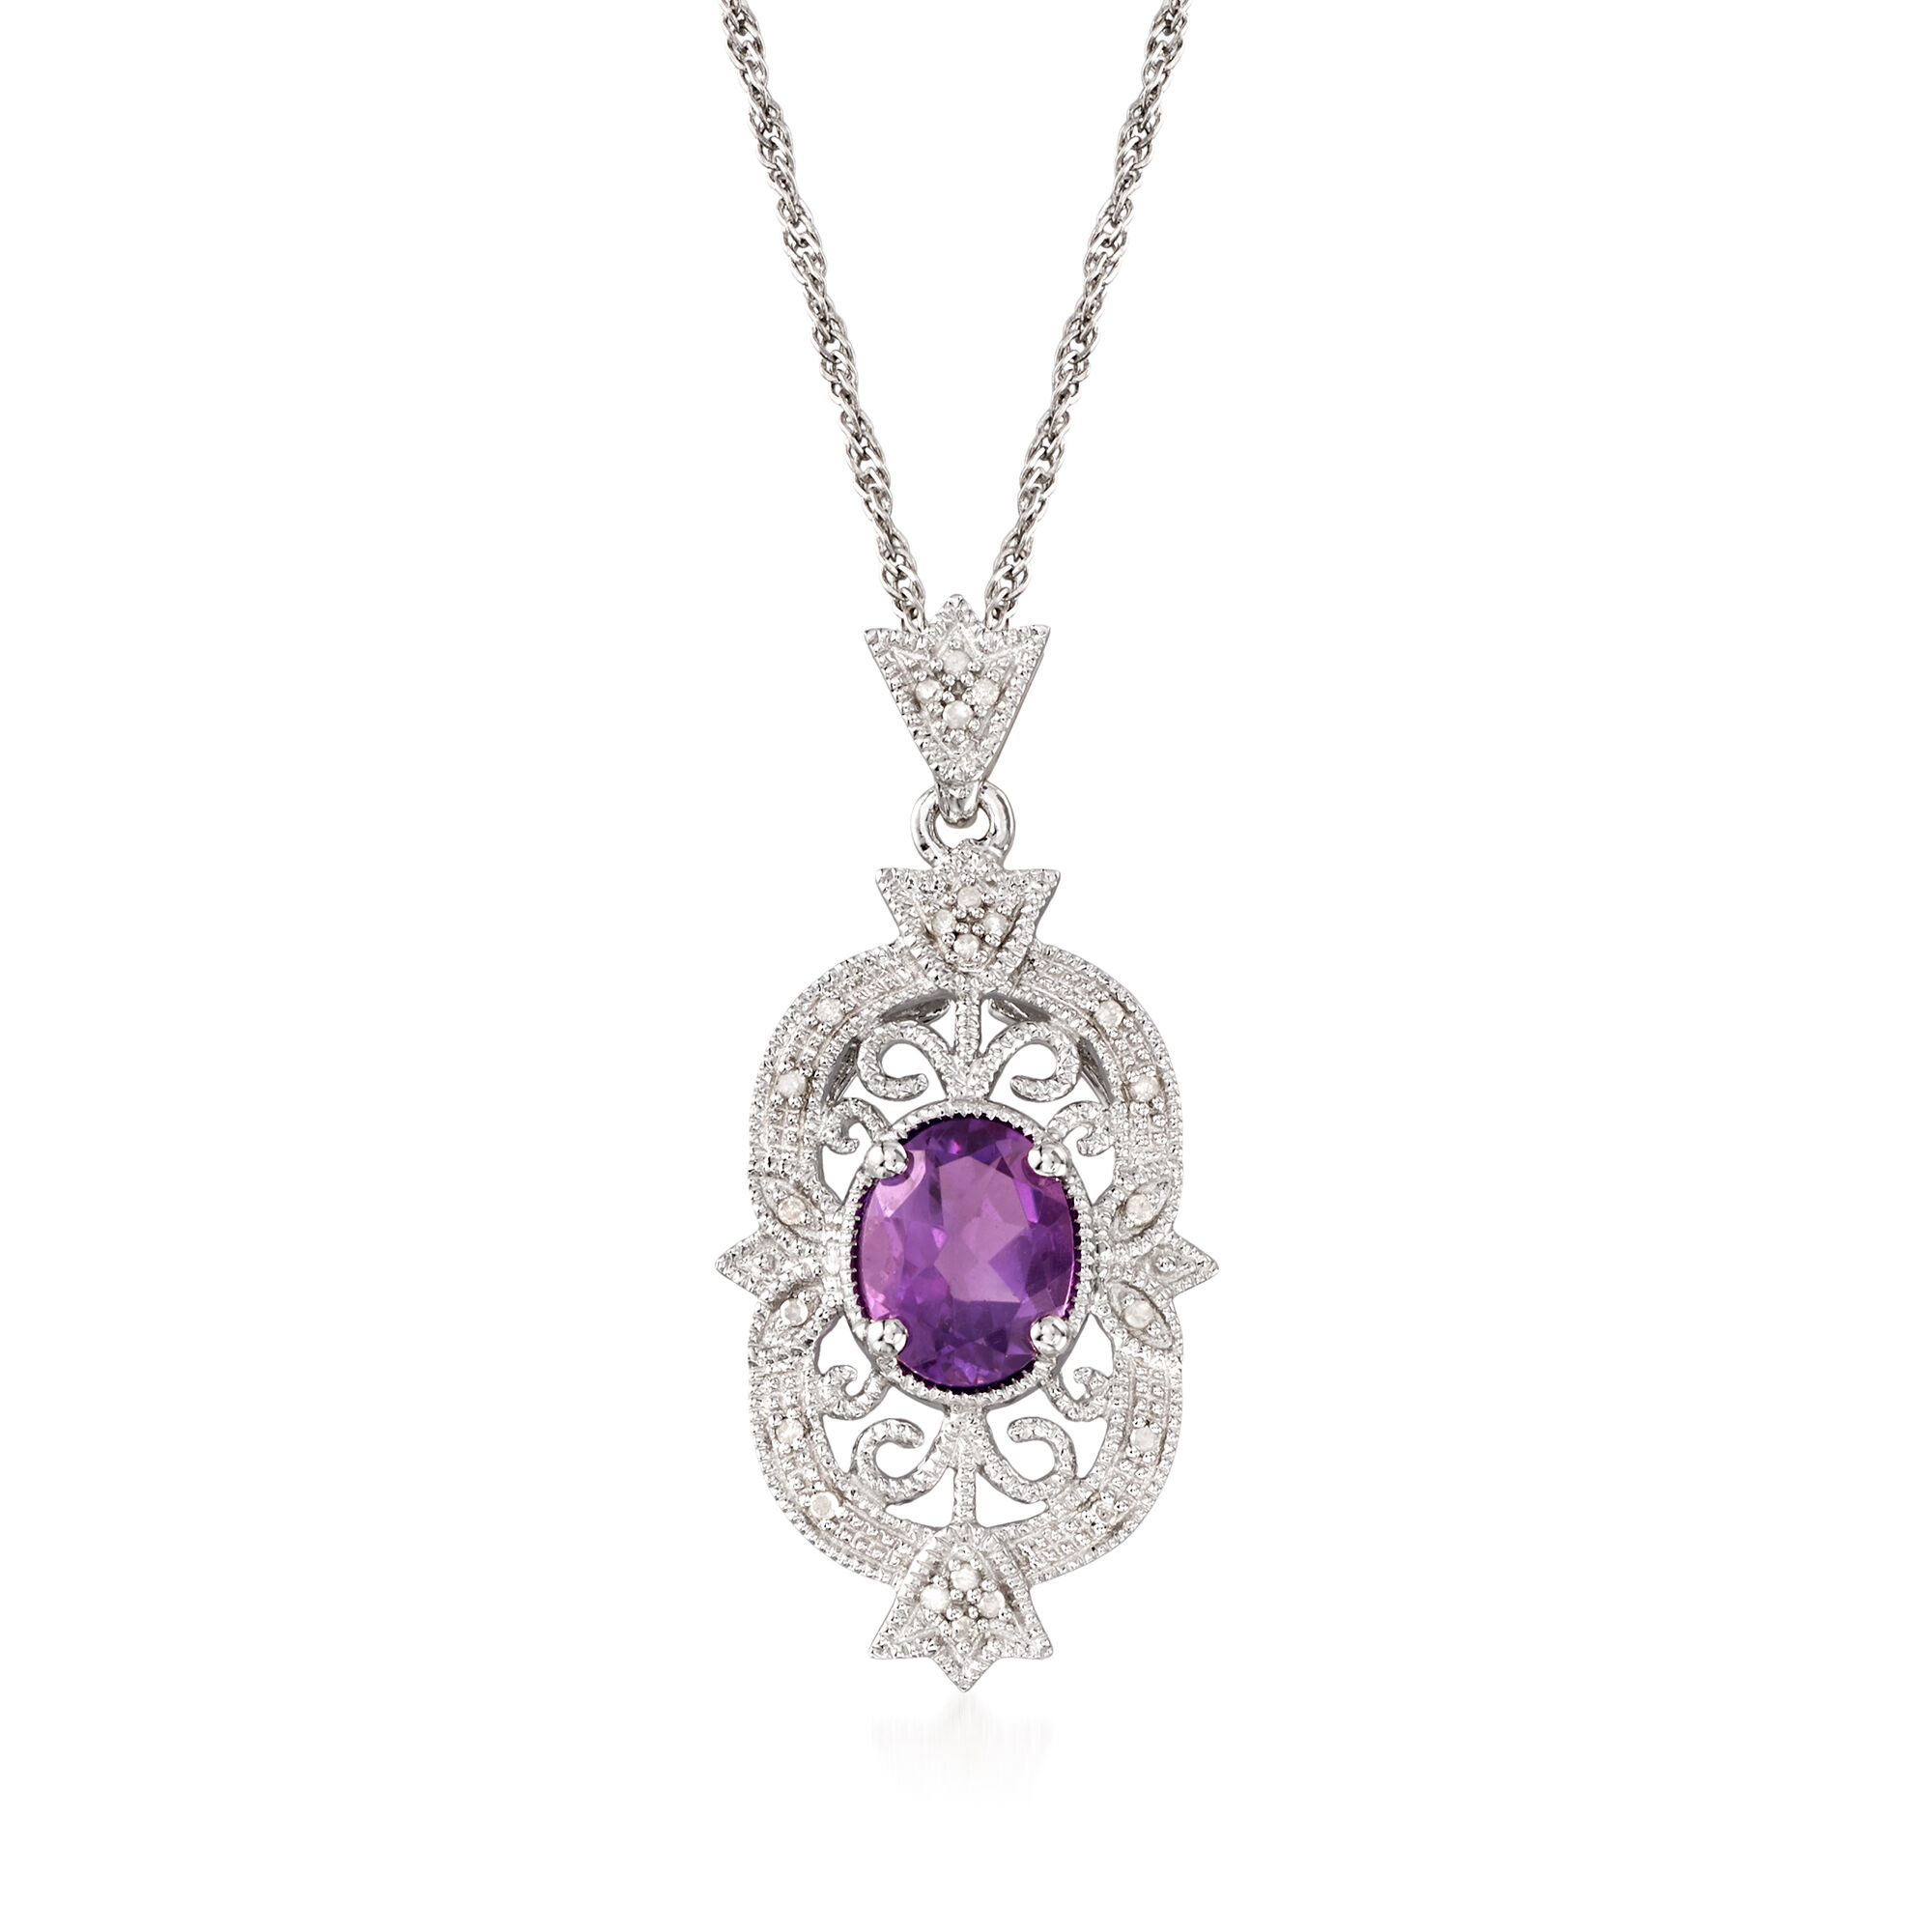 Details about   Solitaire Round Amethyst Pendant Necklace in Sterling Silver 3/4 Carat ctw